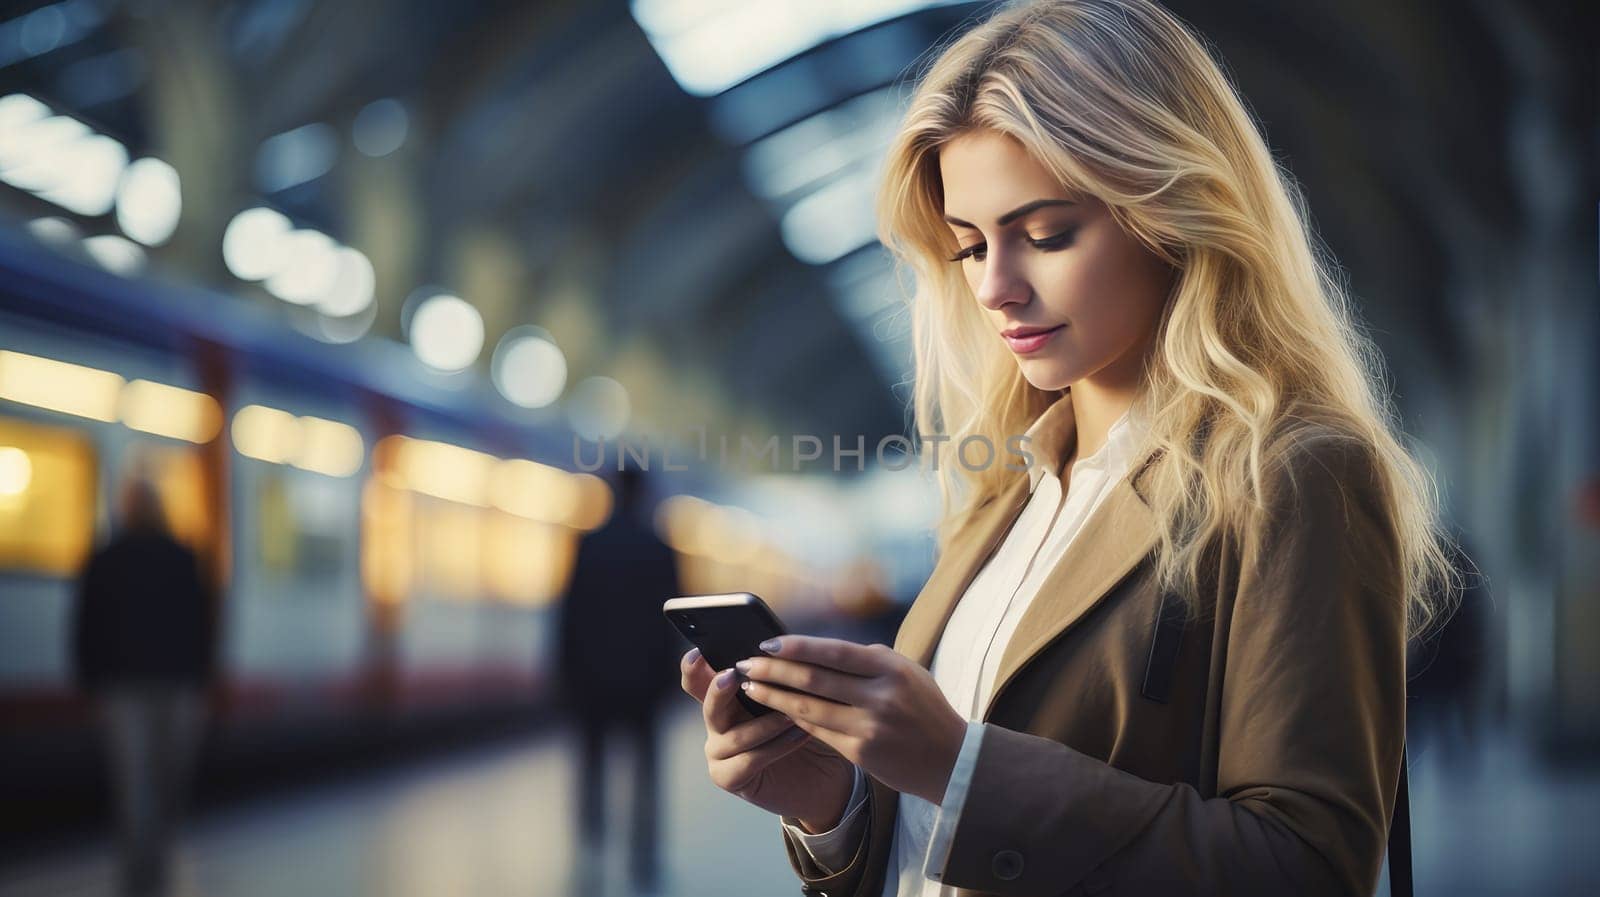 woman with smartphone in hands at railway station by Alla_Yurtayeva